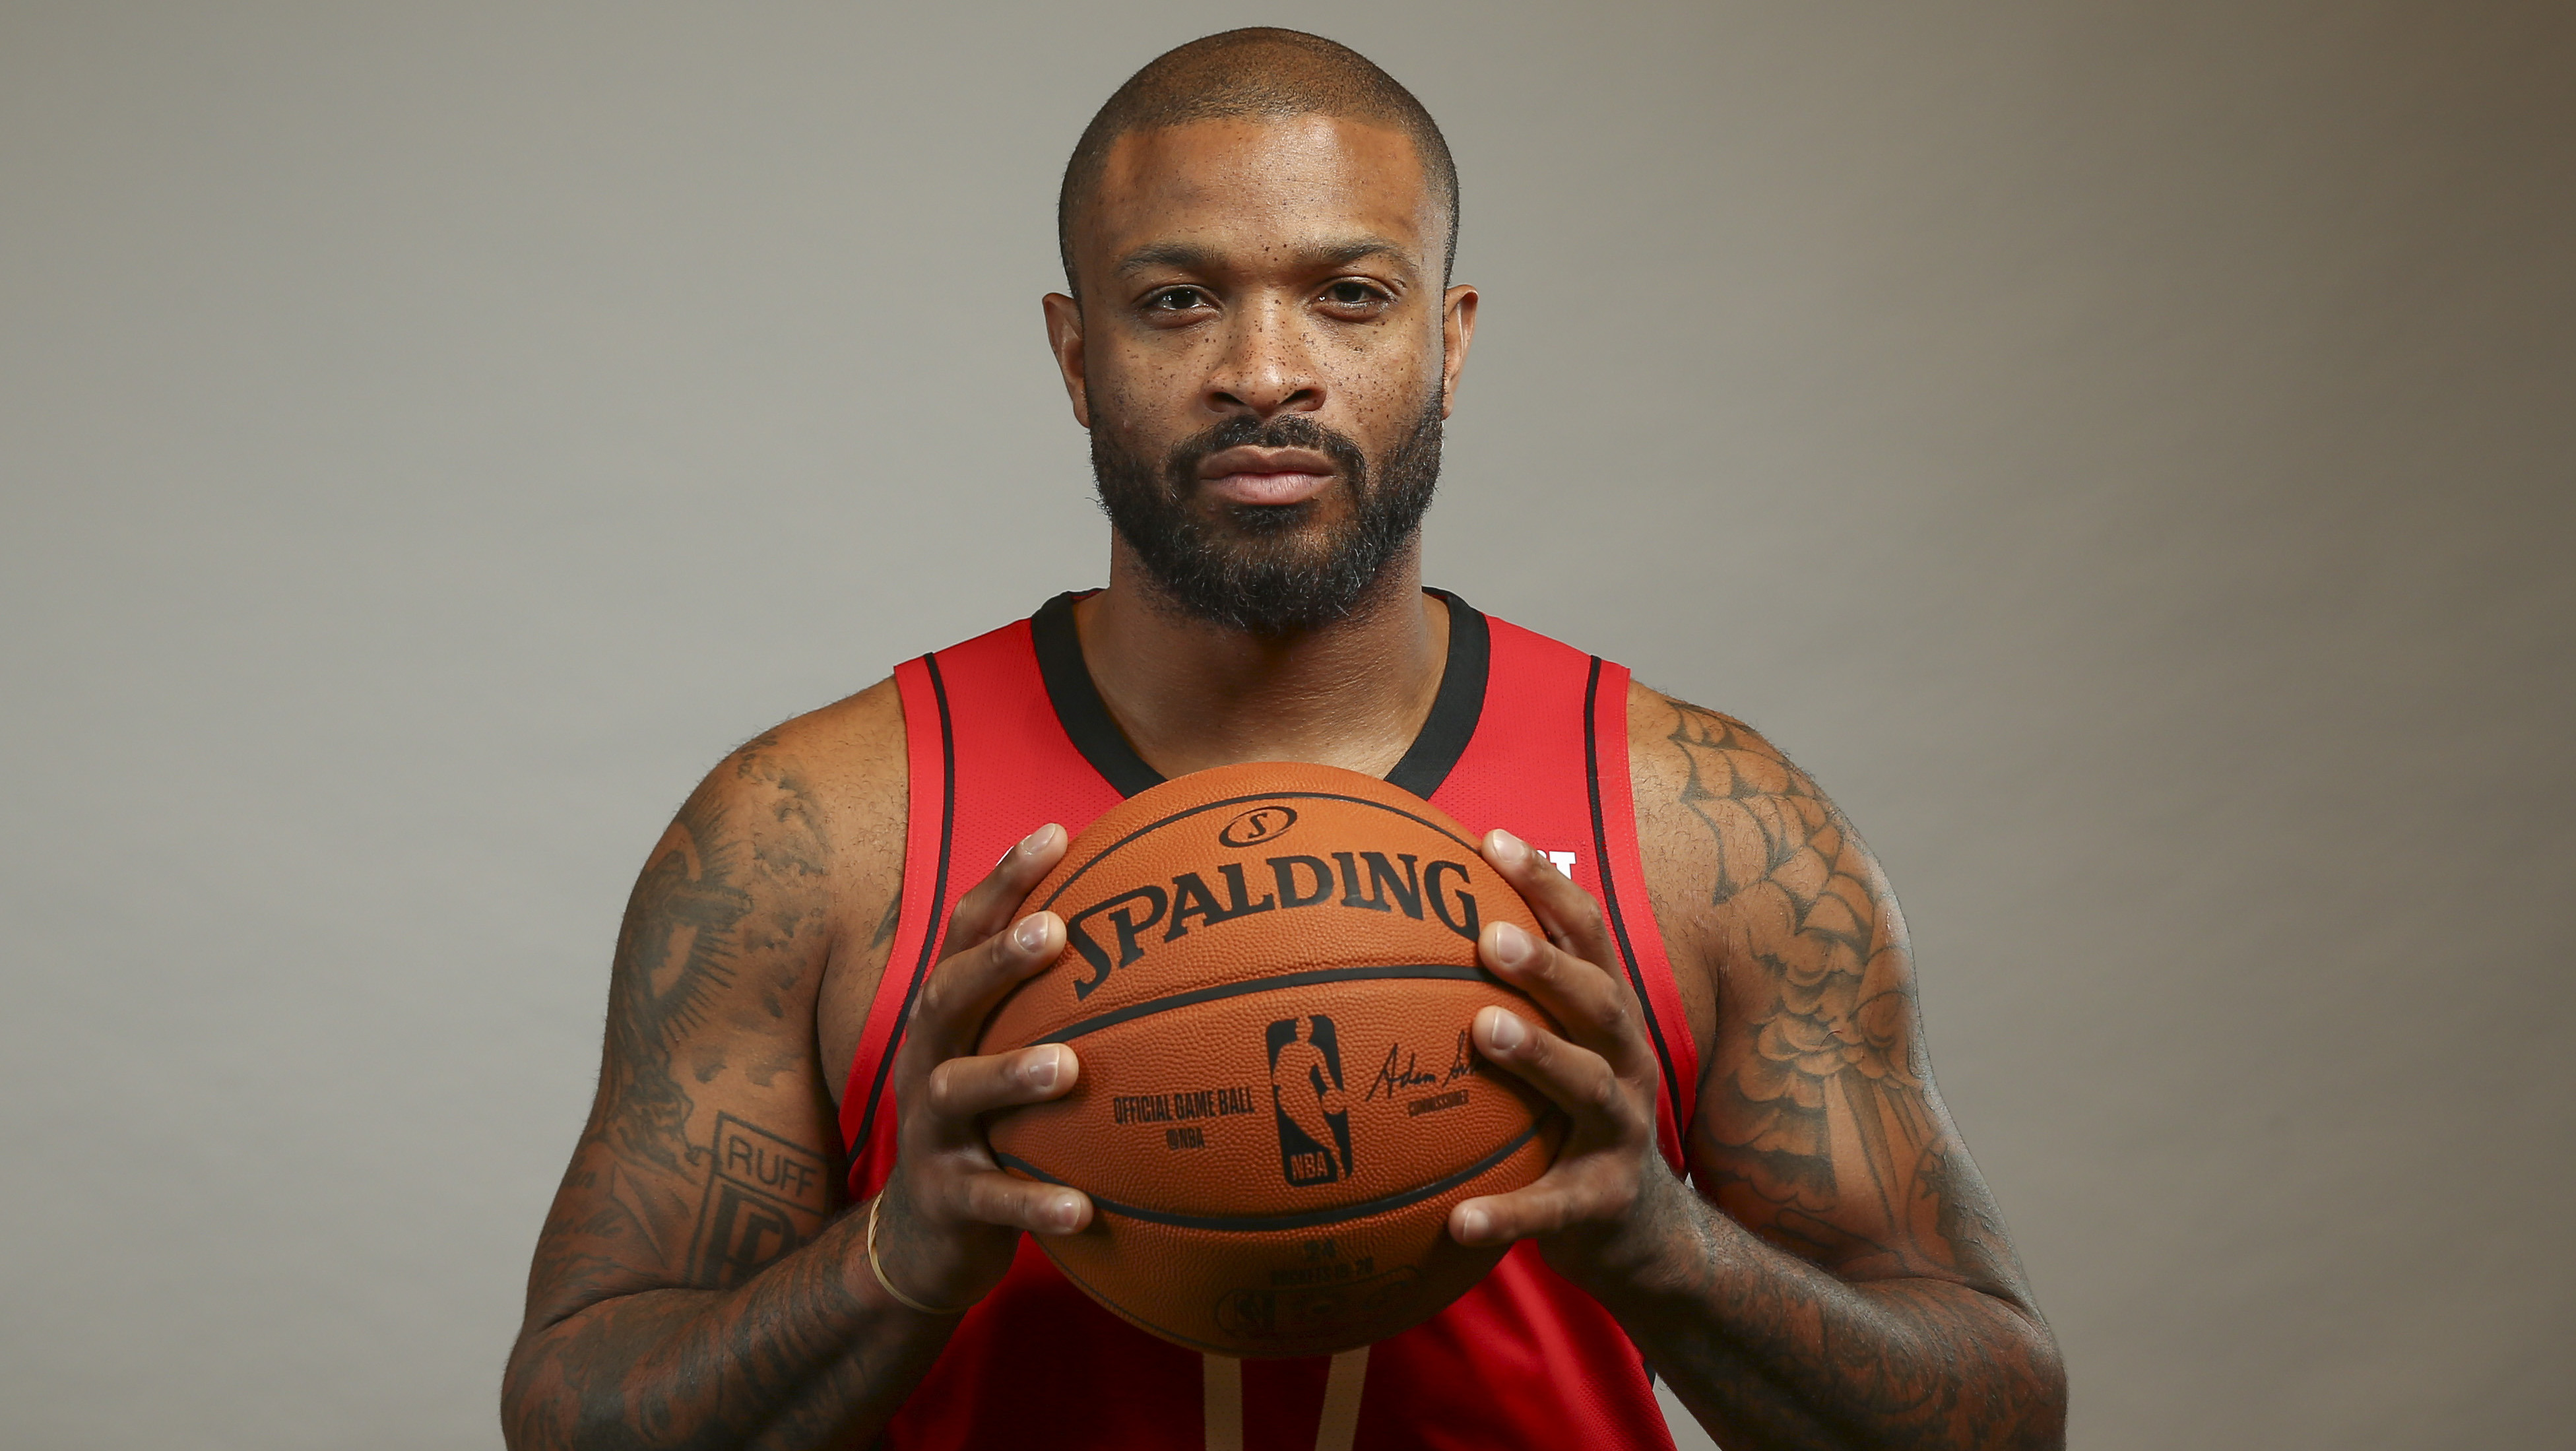 Rockets' P.J. Tucker shows off insane amount of shoes